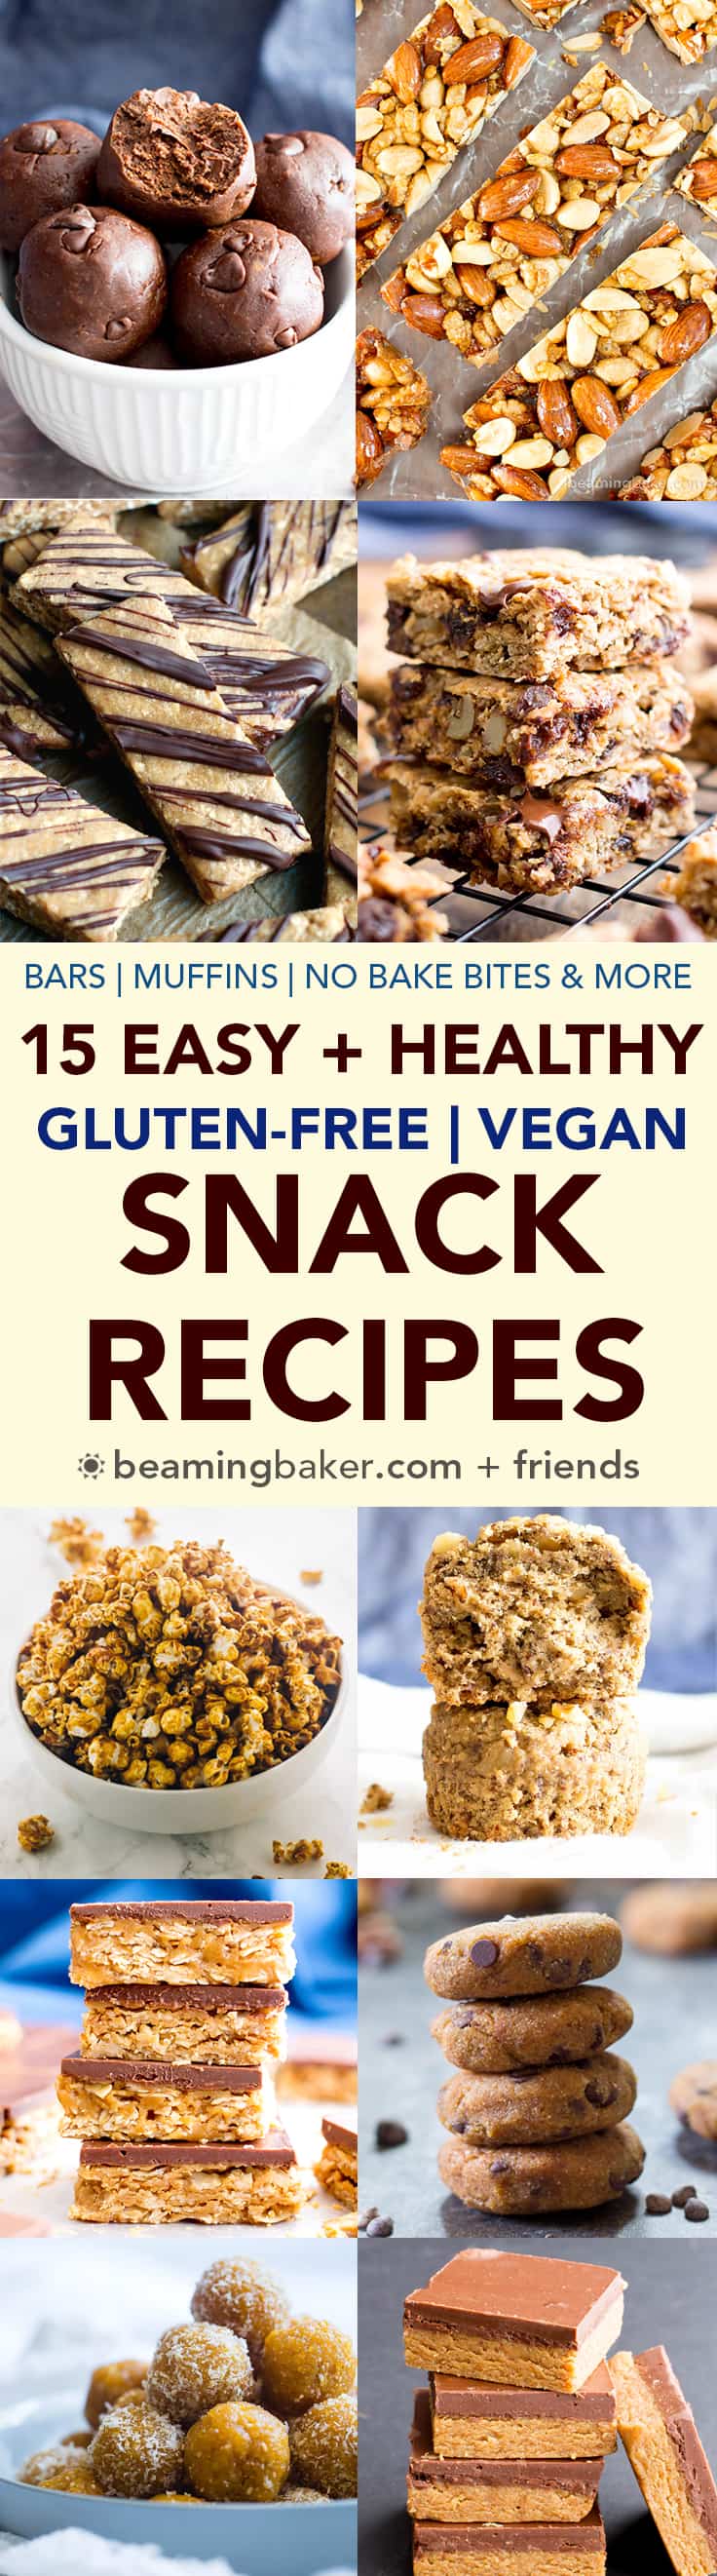 15 Easy Healthy Gluten Free Vegan Snack Recipes (V, GF): a yummy collection of easy ‘n healthy plant-based snacks to help you get fueled! #Vegan #GlutenFree #DairyFree #ProteinRich | BeamingBaker.com